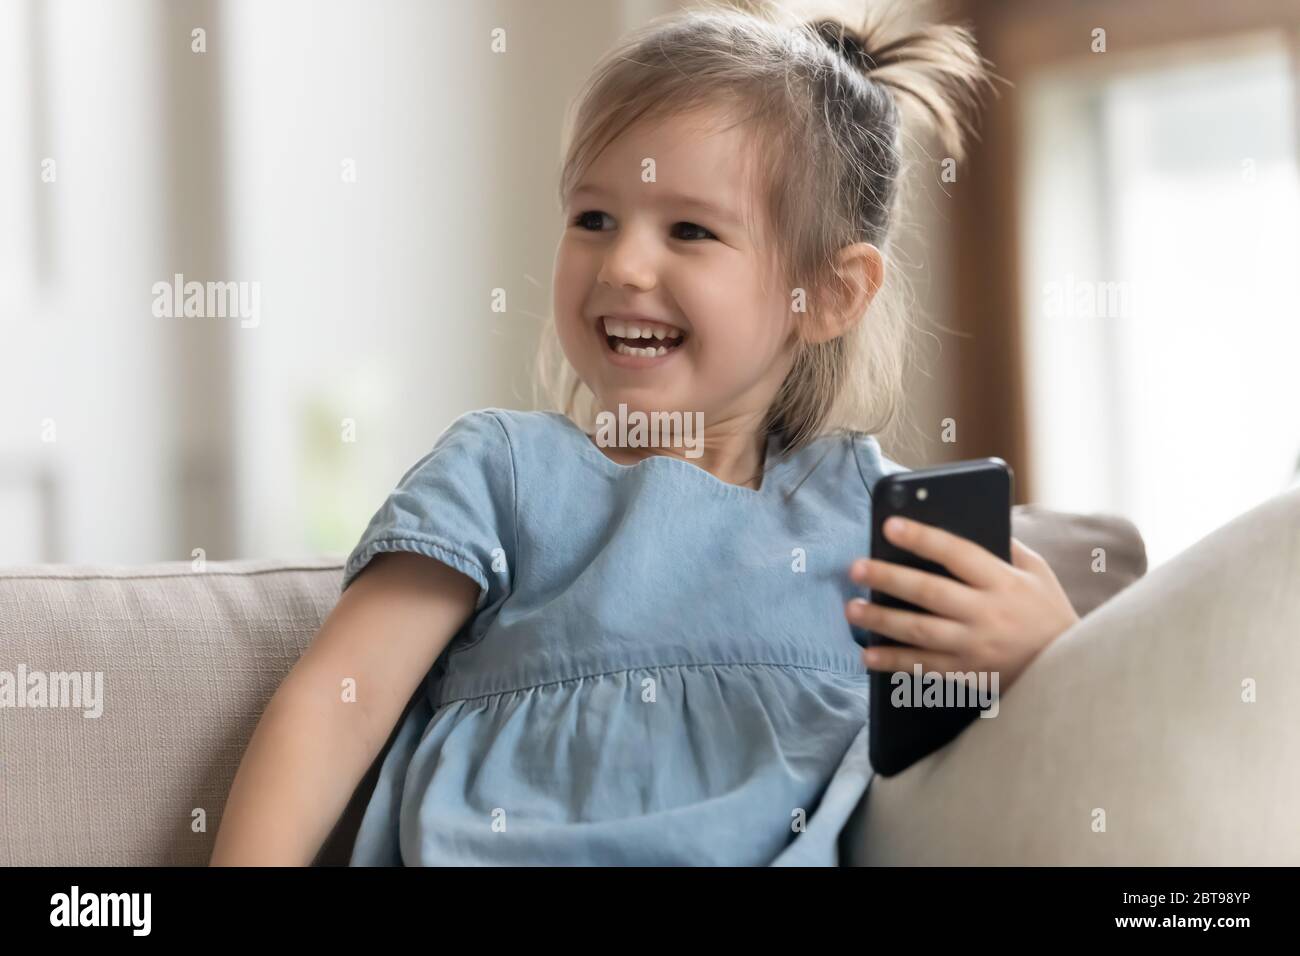 Close up smiling funny little girl holding phone, having fun Stock Photo